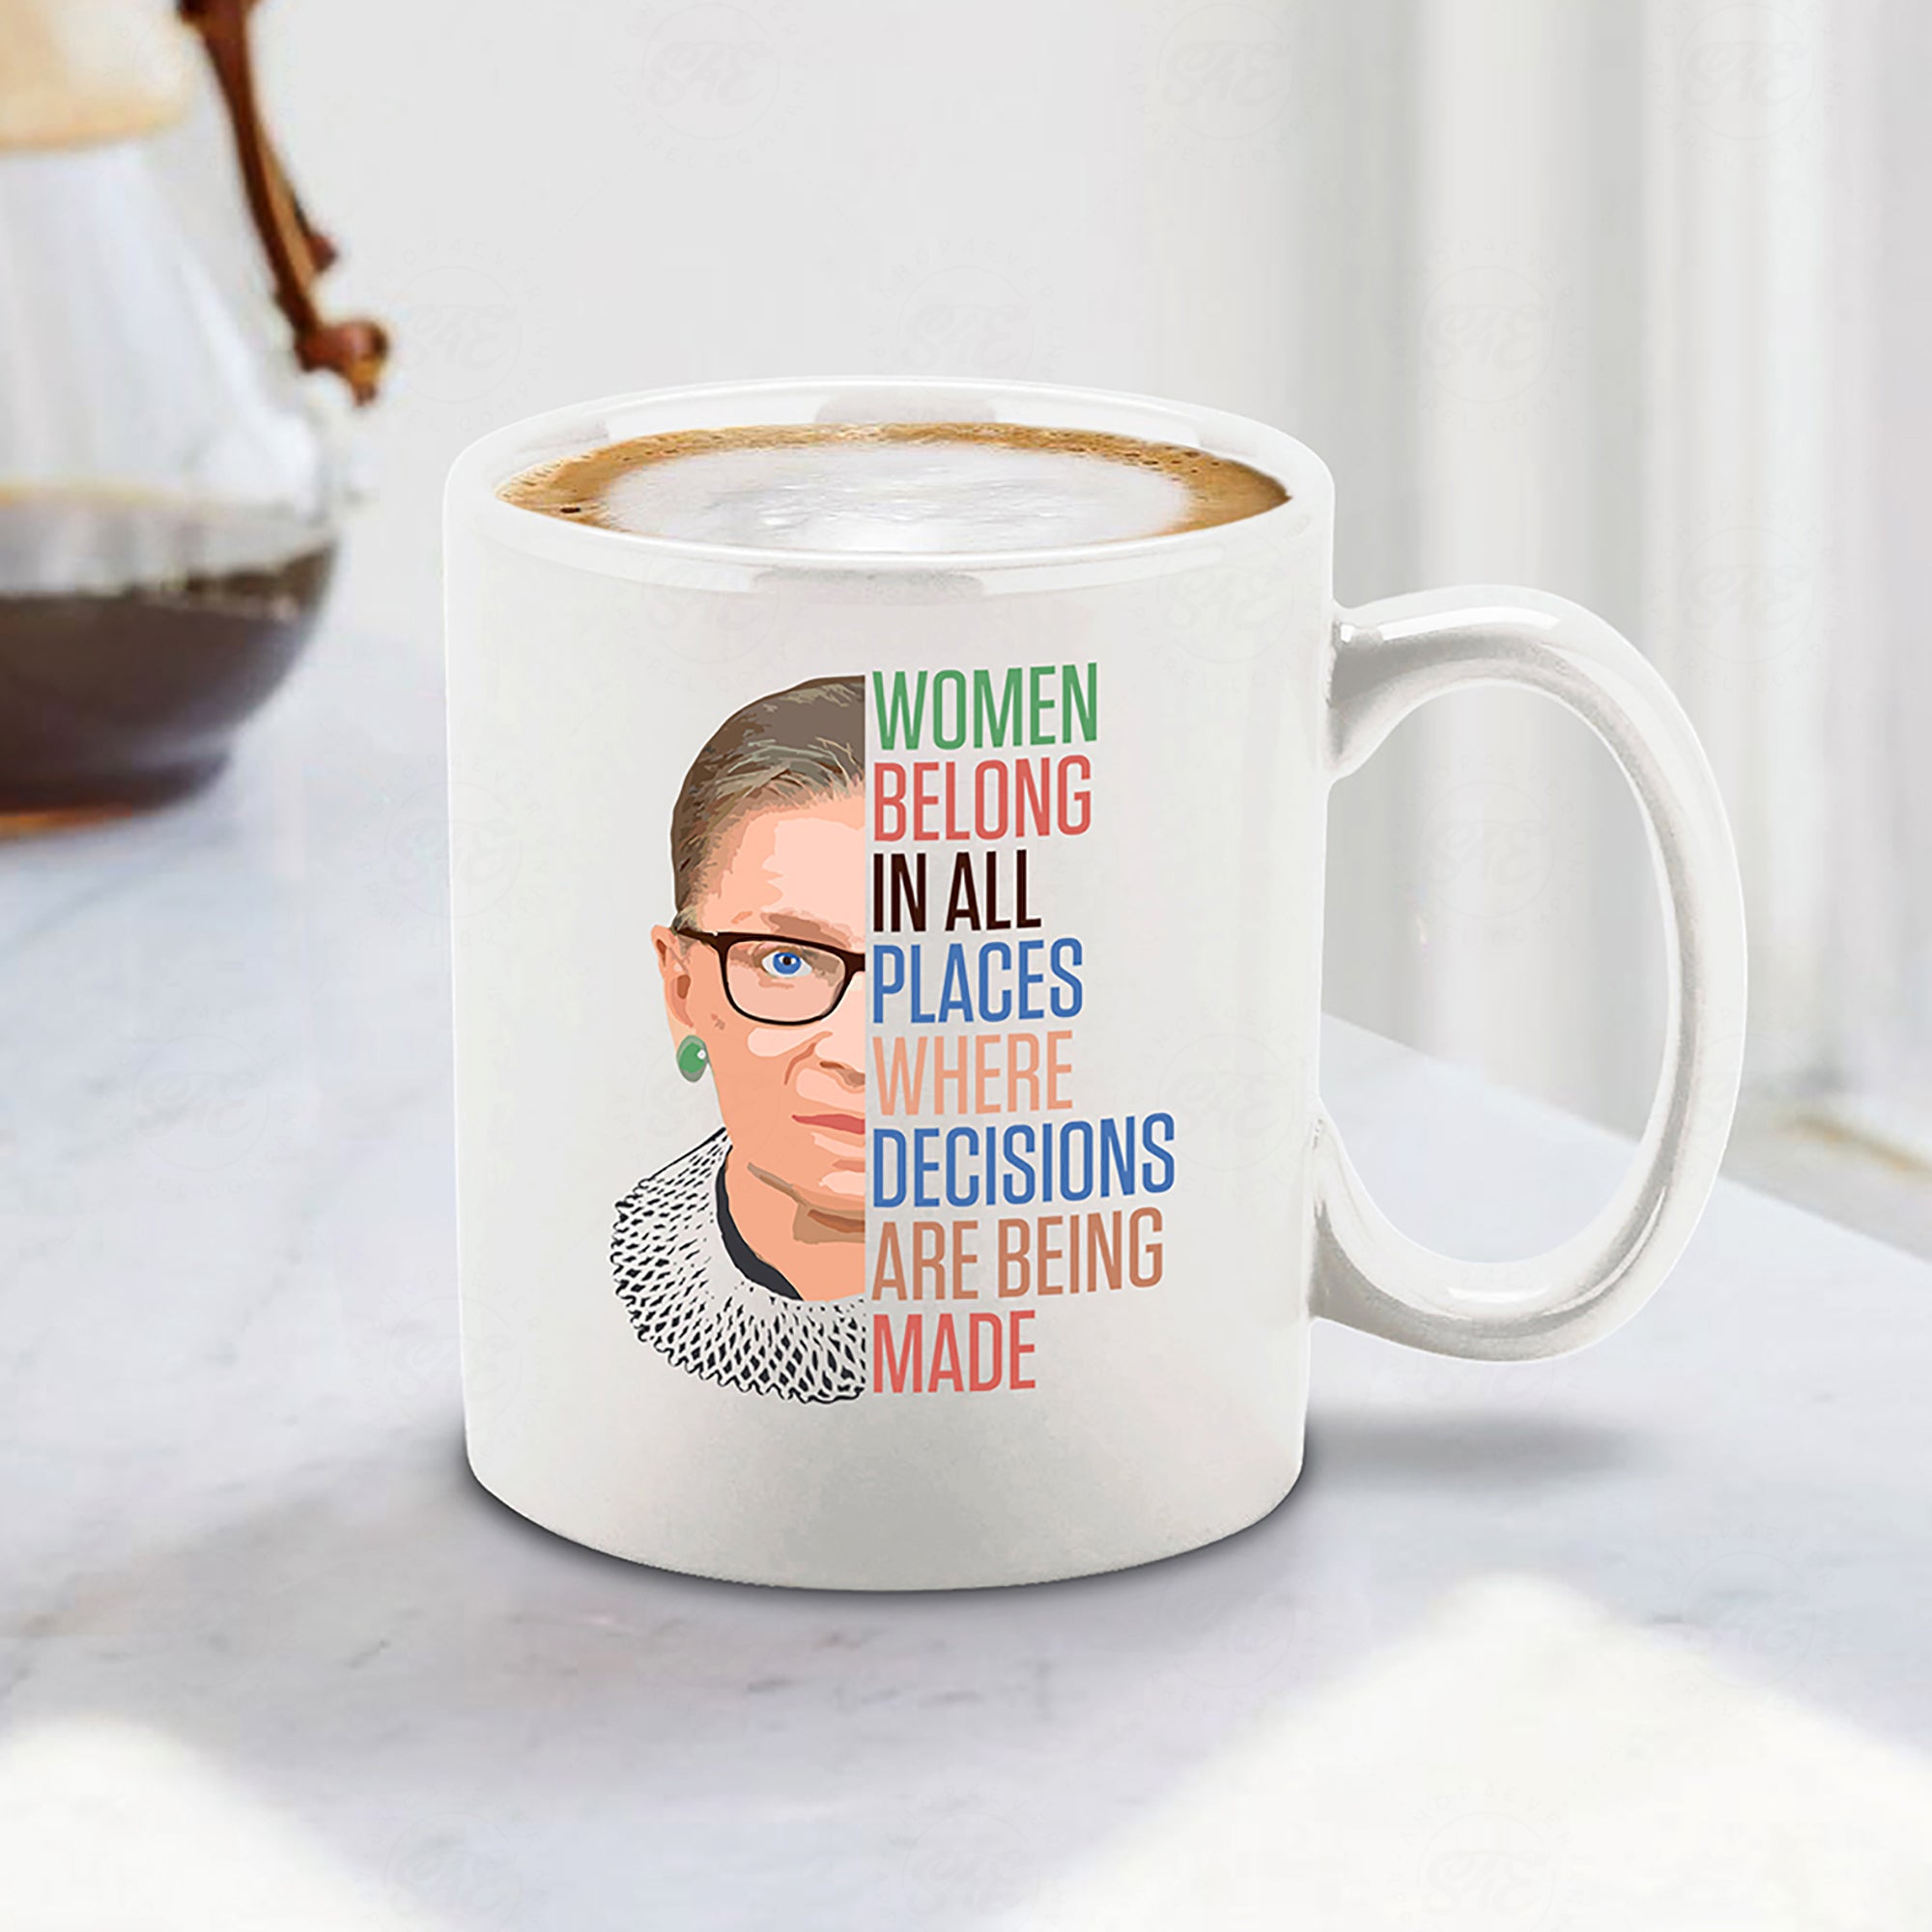 Women Belong In All Places Where Decisions Are Being Made Ceramic Coffee Mug Tea Cup RBG Gift Ruth Bader Ginsburg Mug (Colorful)